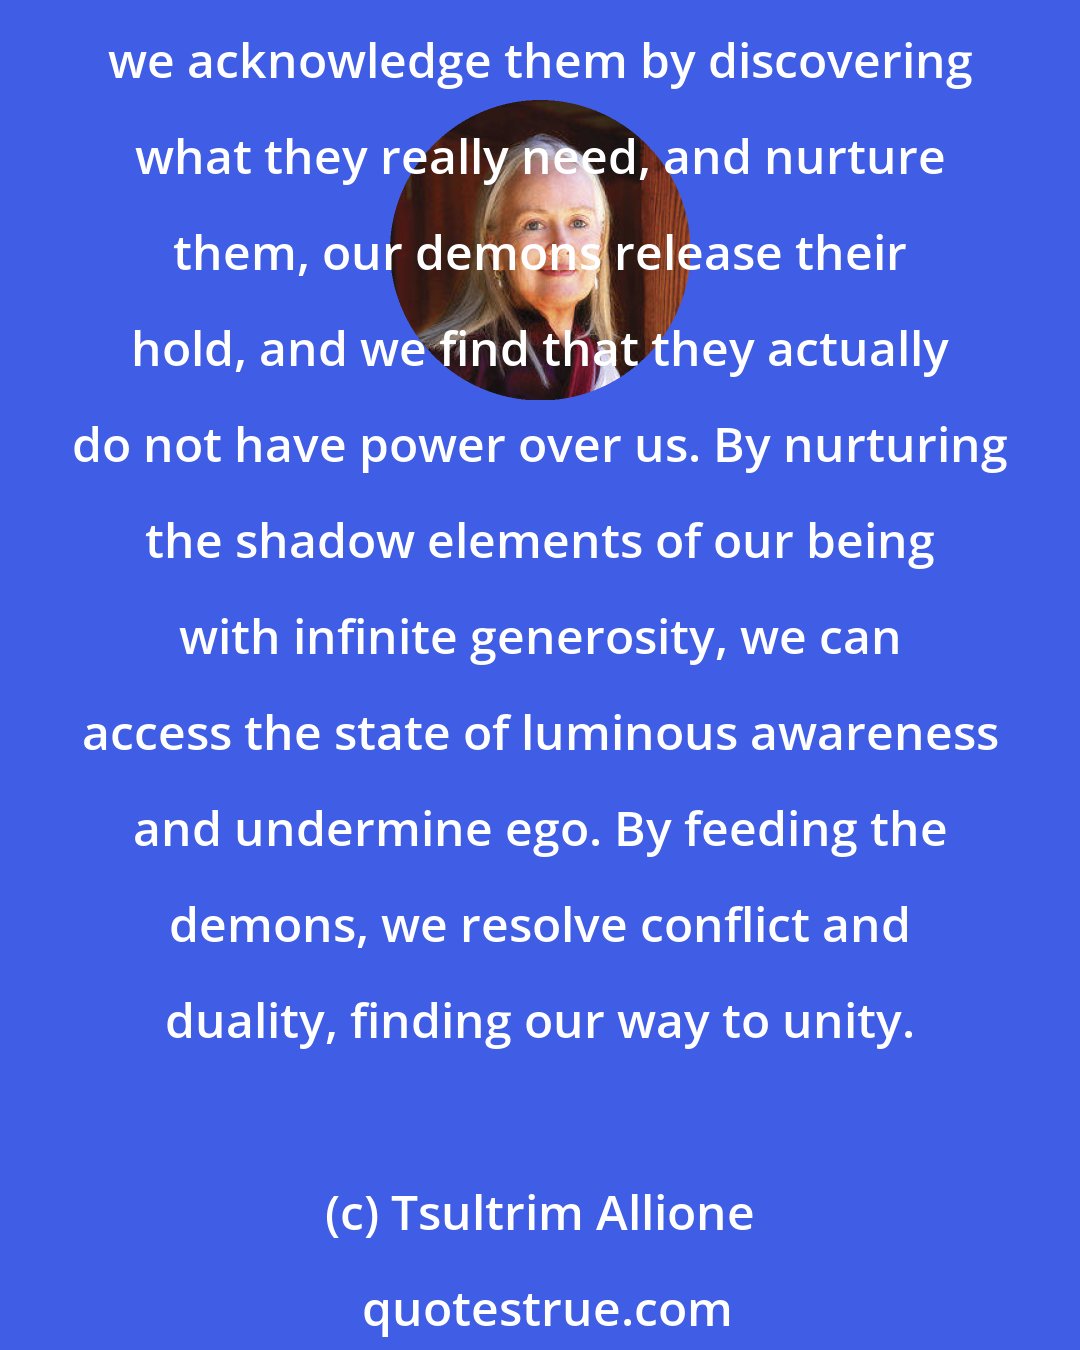 Tsultrim Allione: Normally we empower our demons by believing they are real and strong in themselves and have the power to destroy us. As we fight against them, they get stronger. But when we acknowledge them by discovering what they really need, and nurture them, our demons release their hold, and we find that they actually do not have power over us. By nurturing the shadow elements of our being with infinite generosity, we can access the state of luminous awareness and undermine ego. By feeding the demons, we resolve conflict and duality, finding our way to unity.